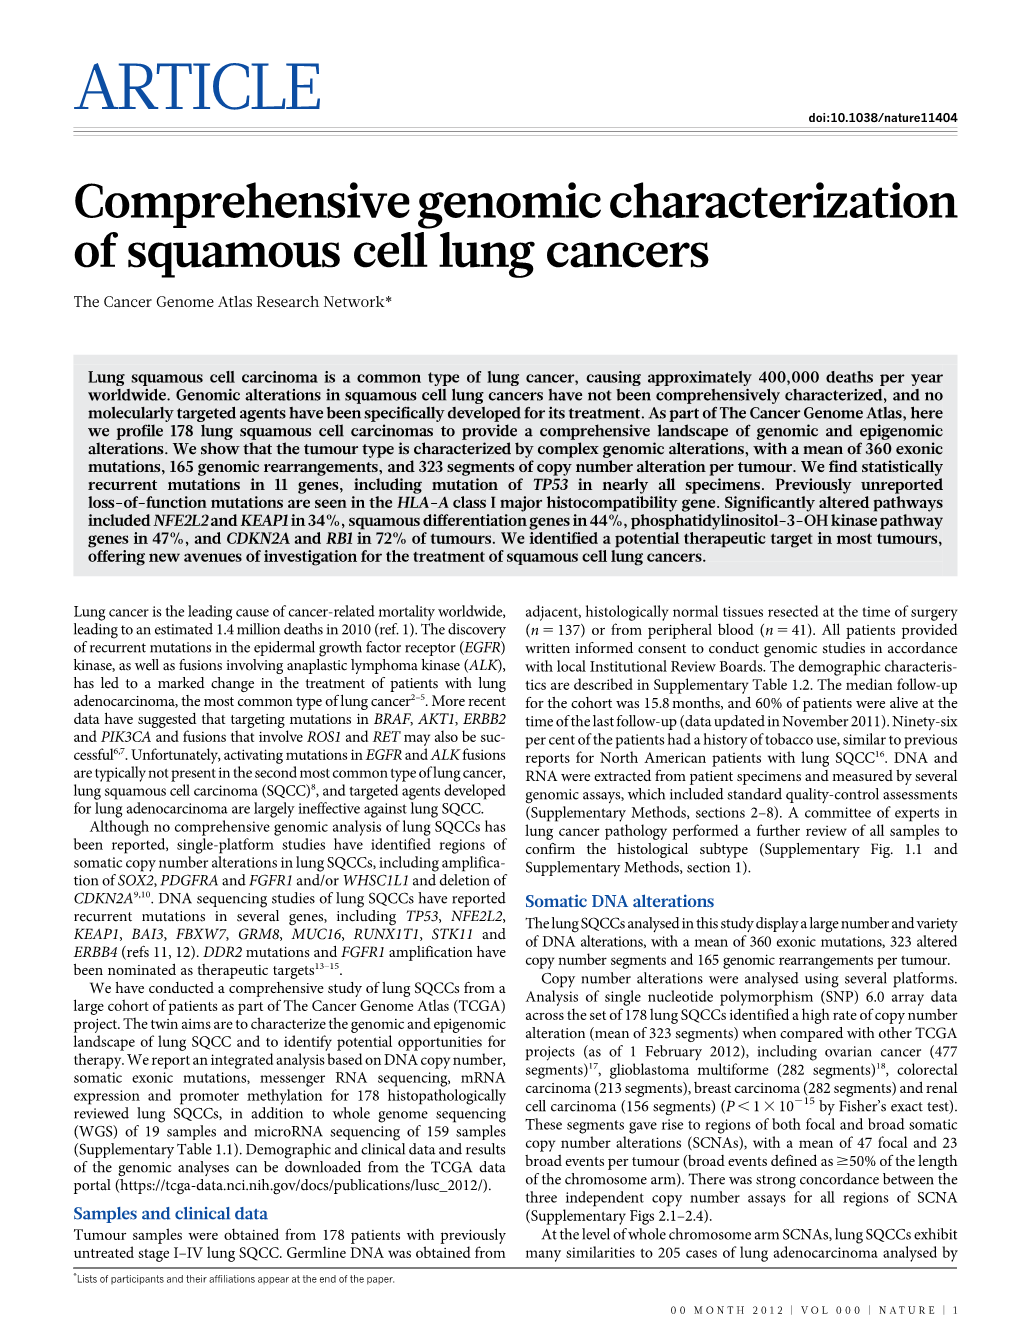 Comprehensive Genomic Characterization of Squamous Cell Lung Cancers